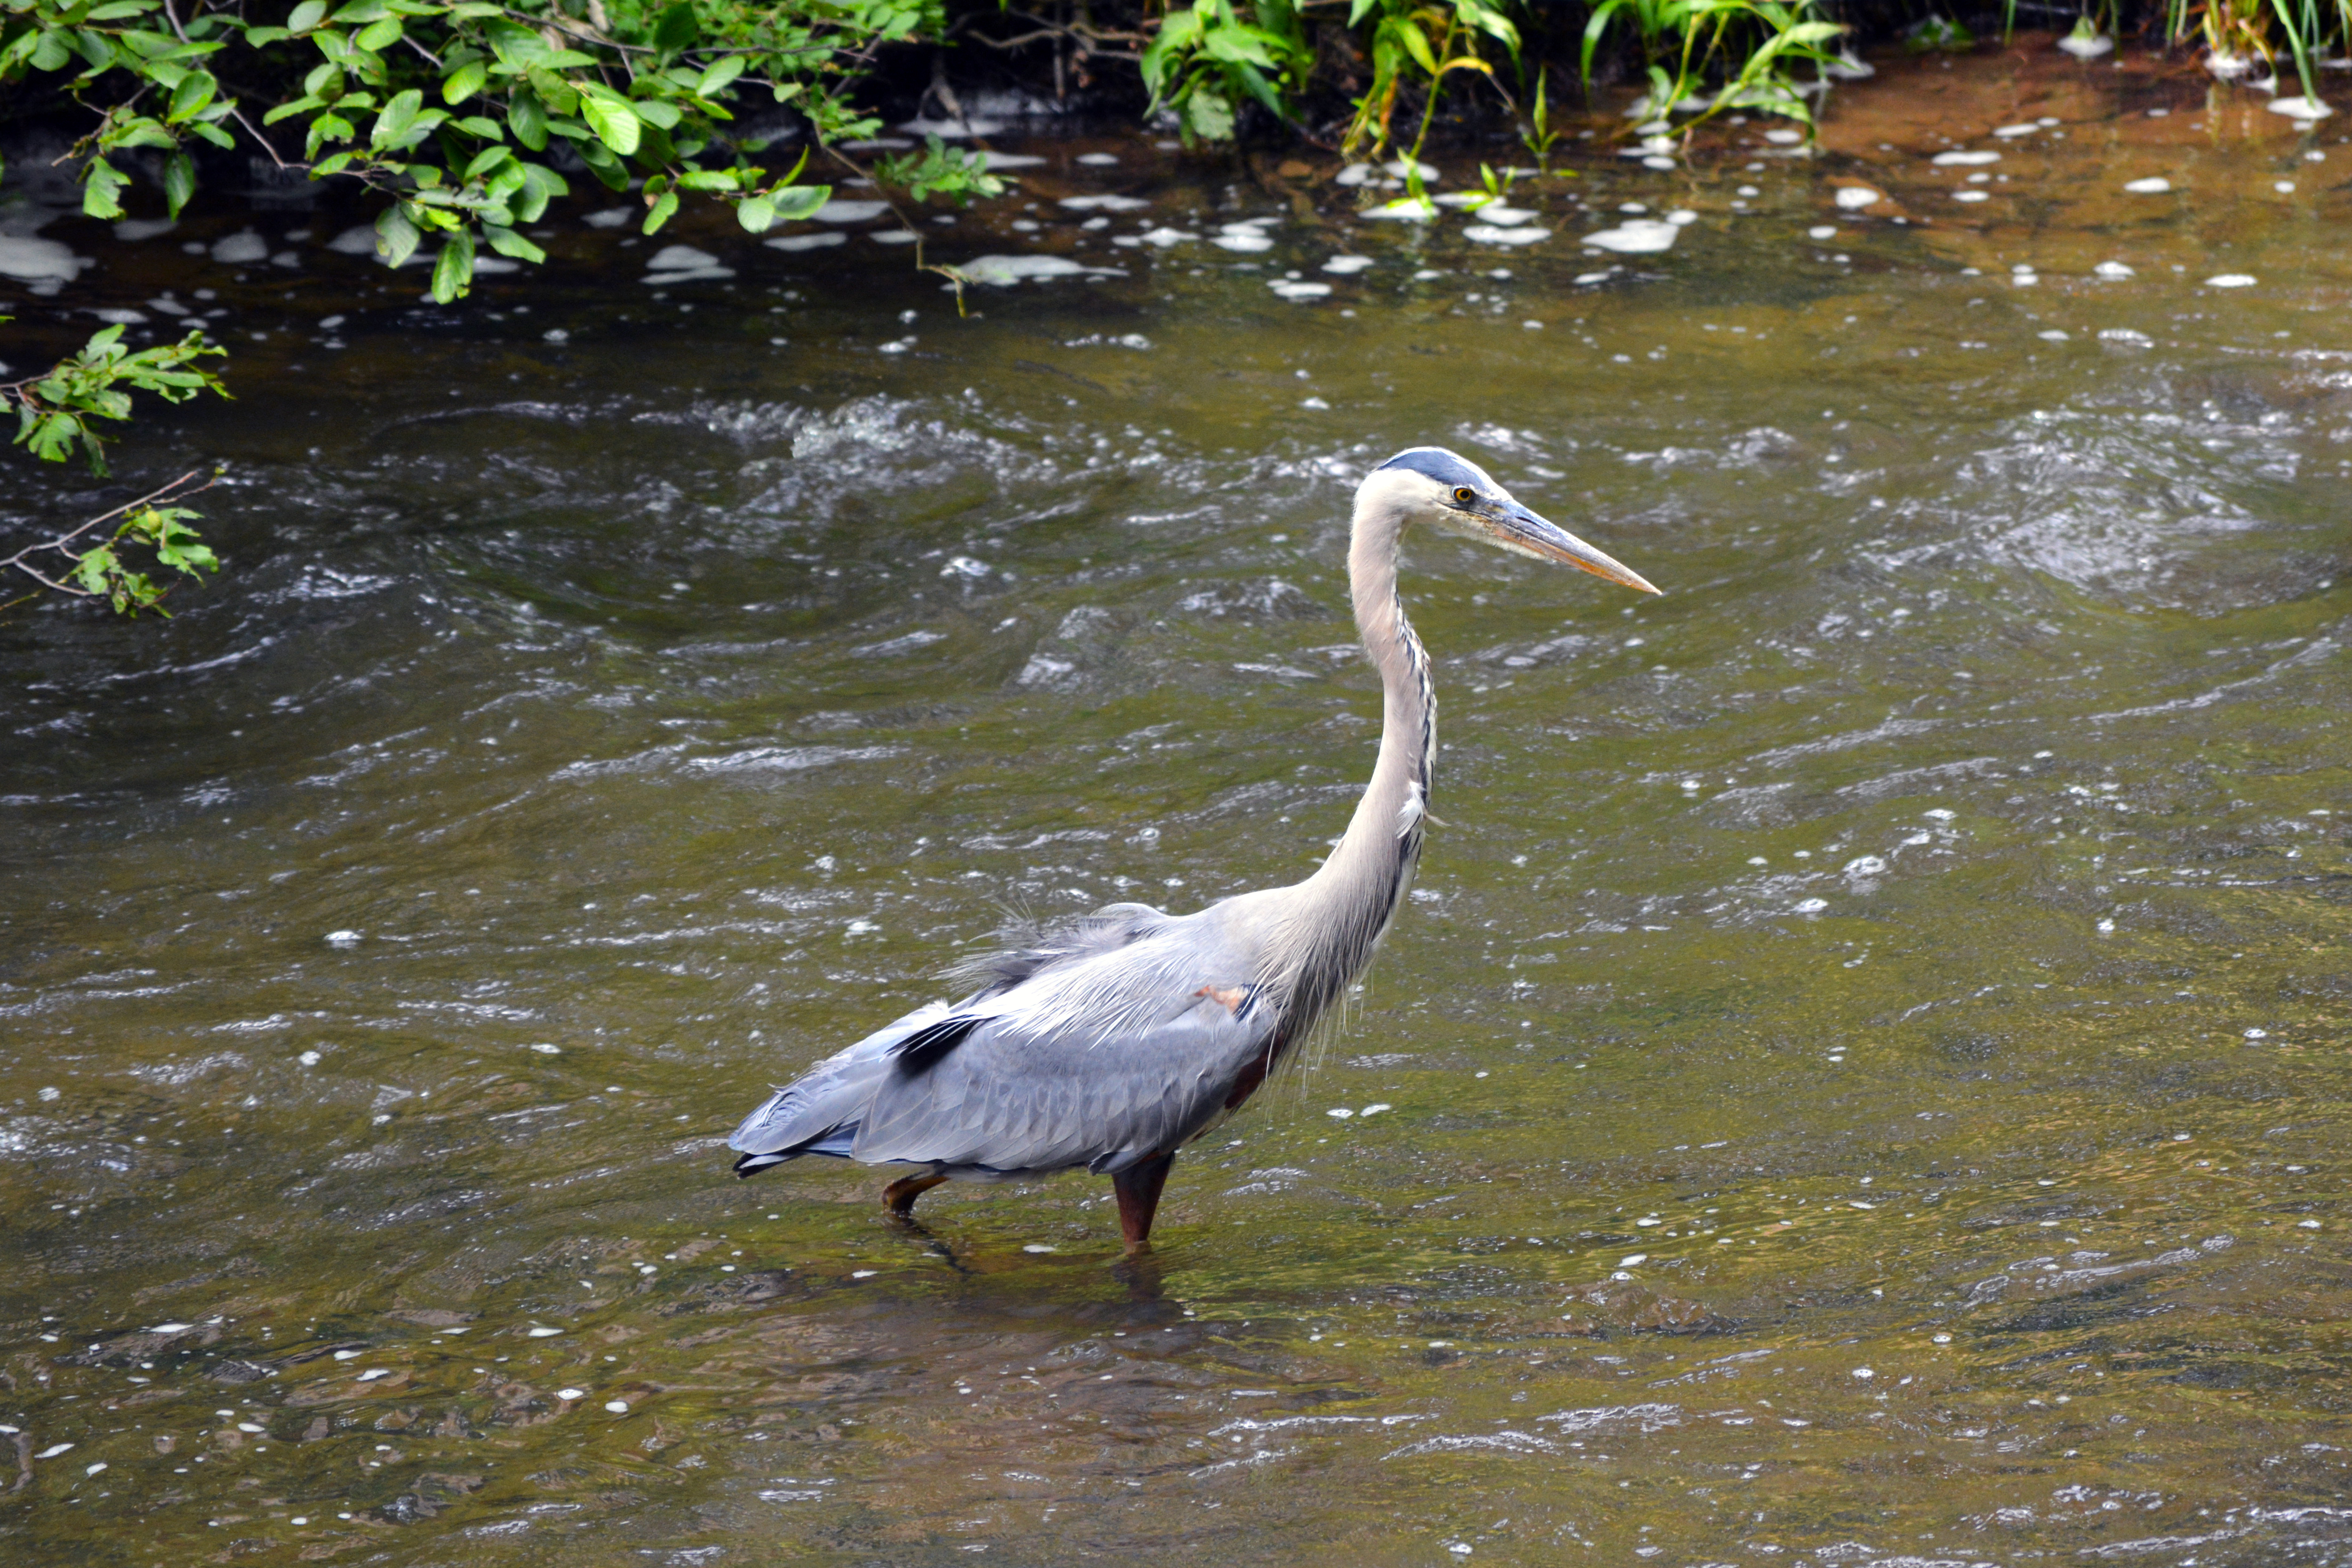 Great Blue Heron fishing in a stream